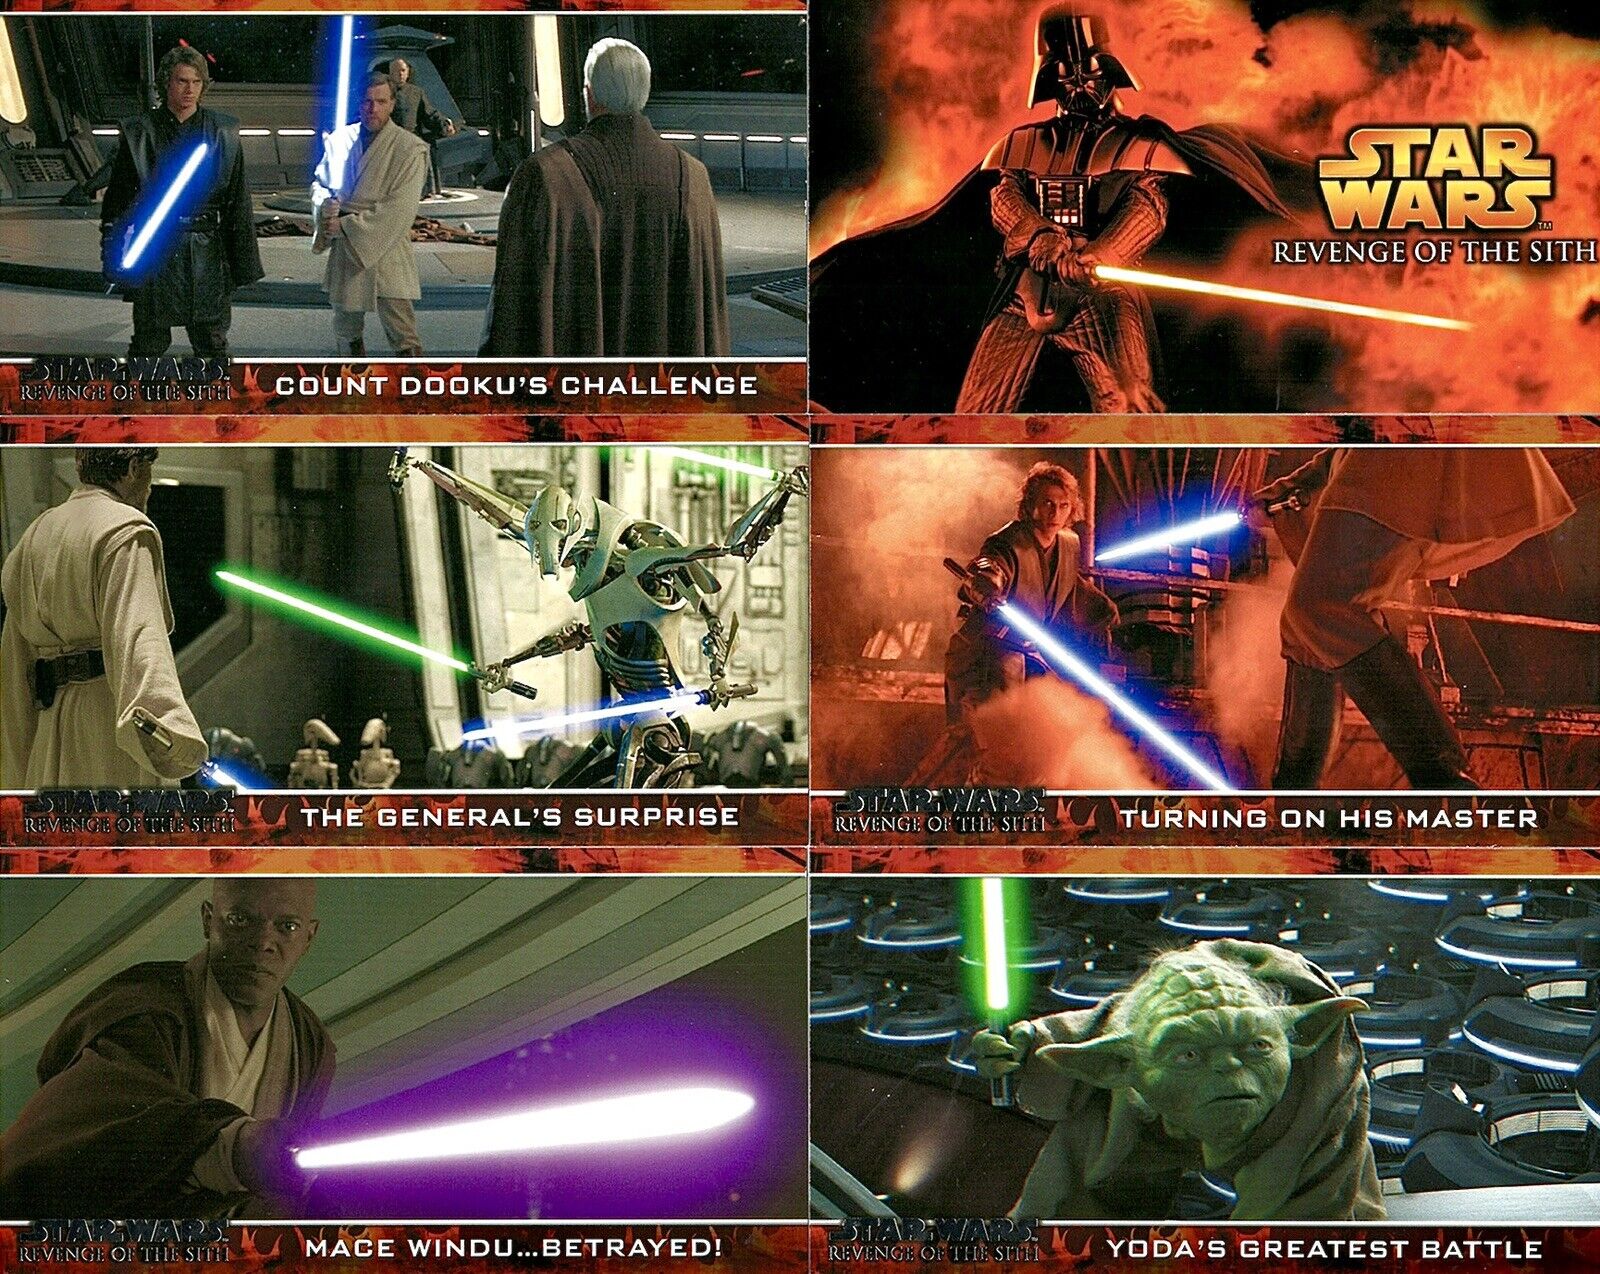 2005 TOPPS STAR WARS REVENGE OF THE SITH WIDEVISION CARDS LOT OF 10 MINT